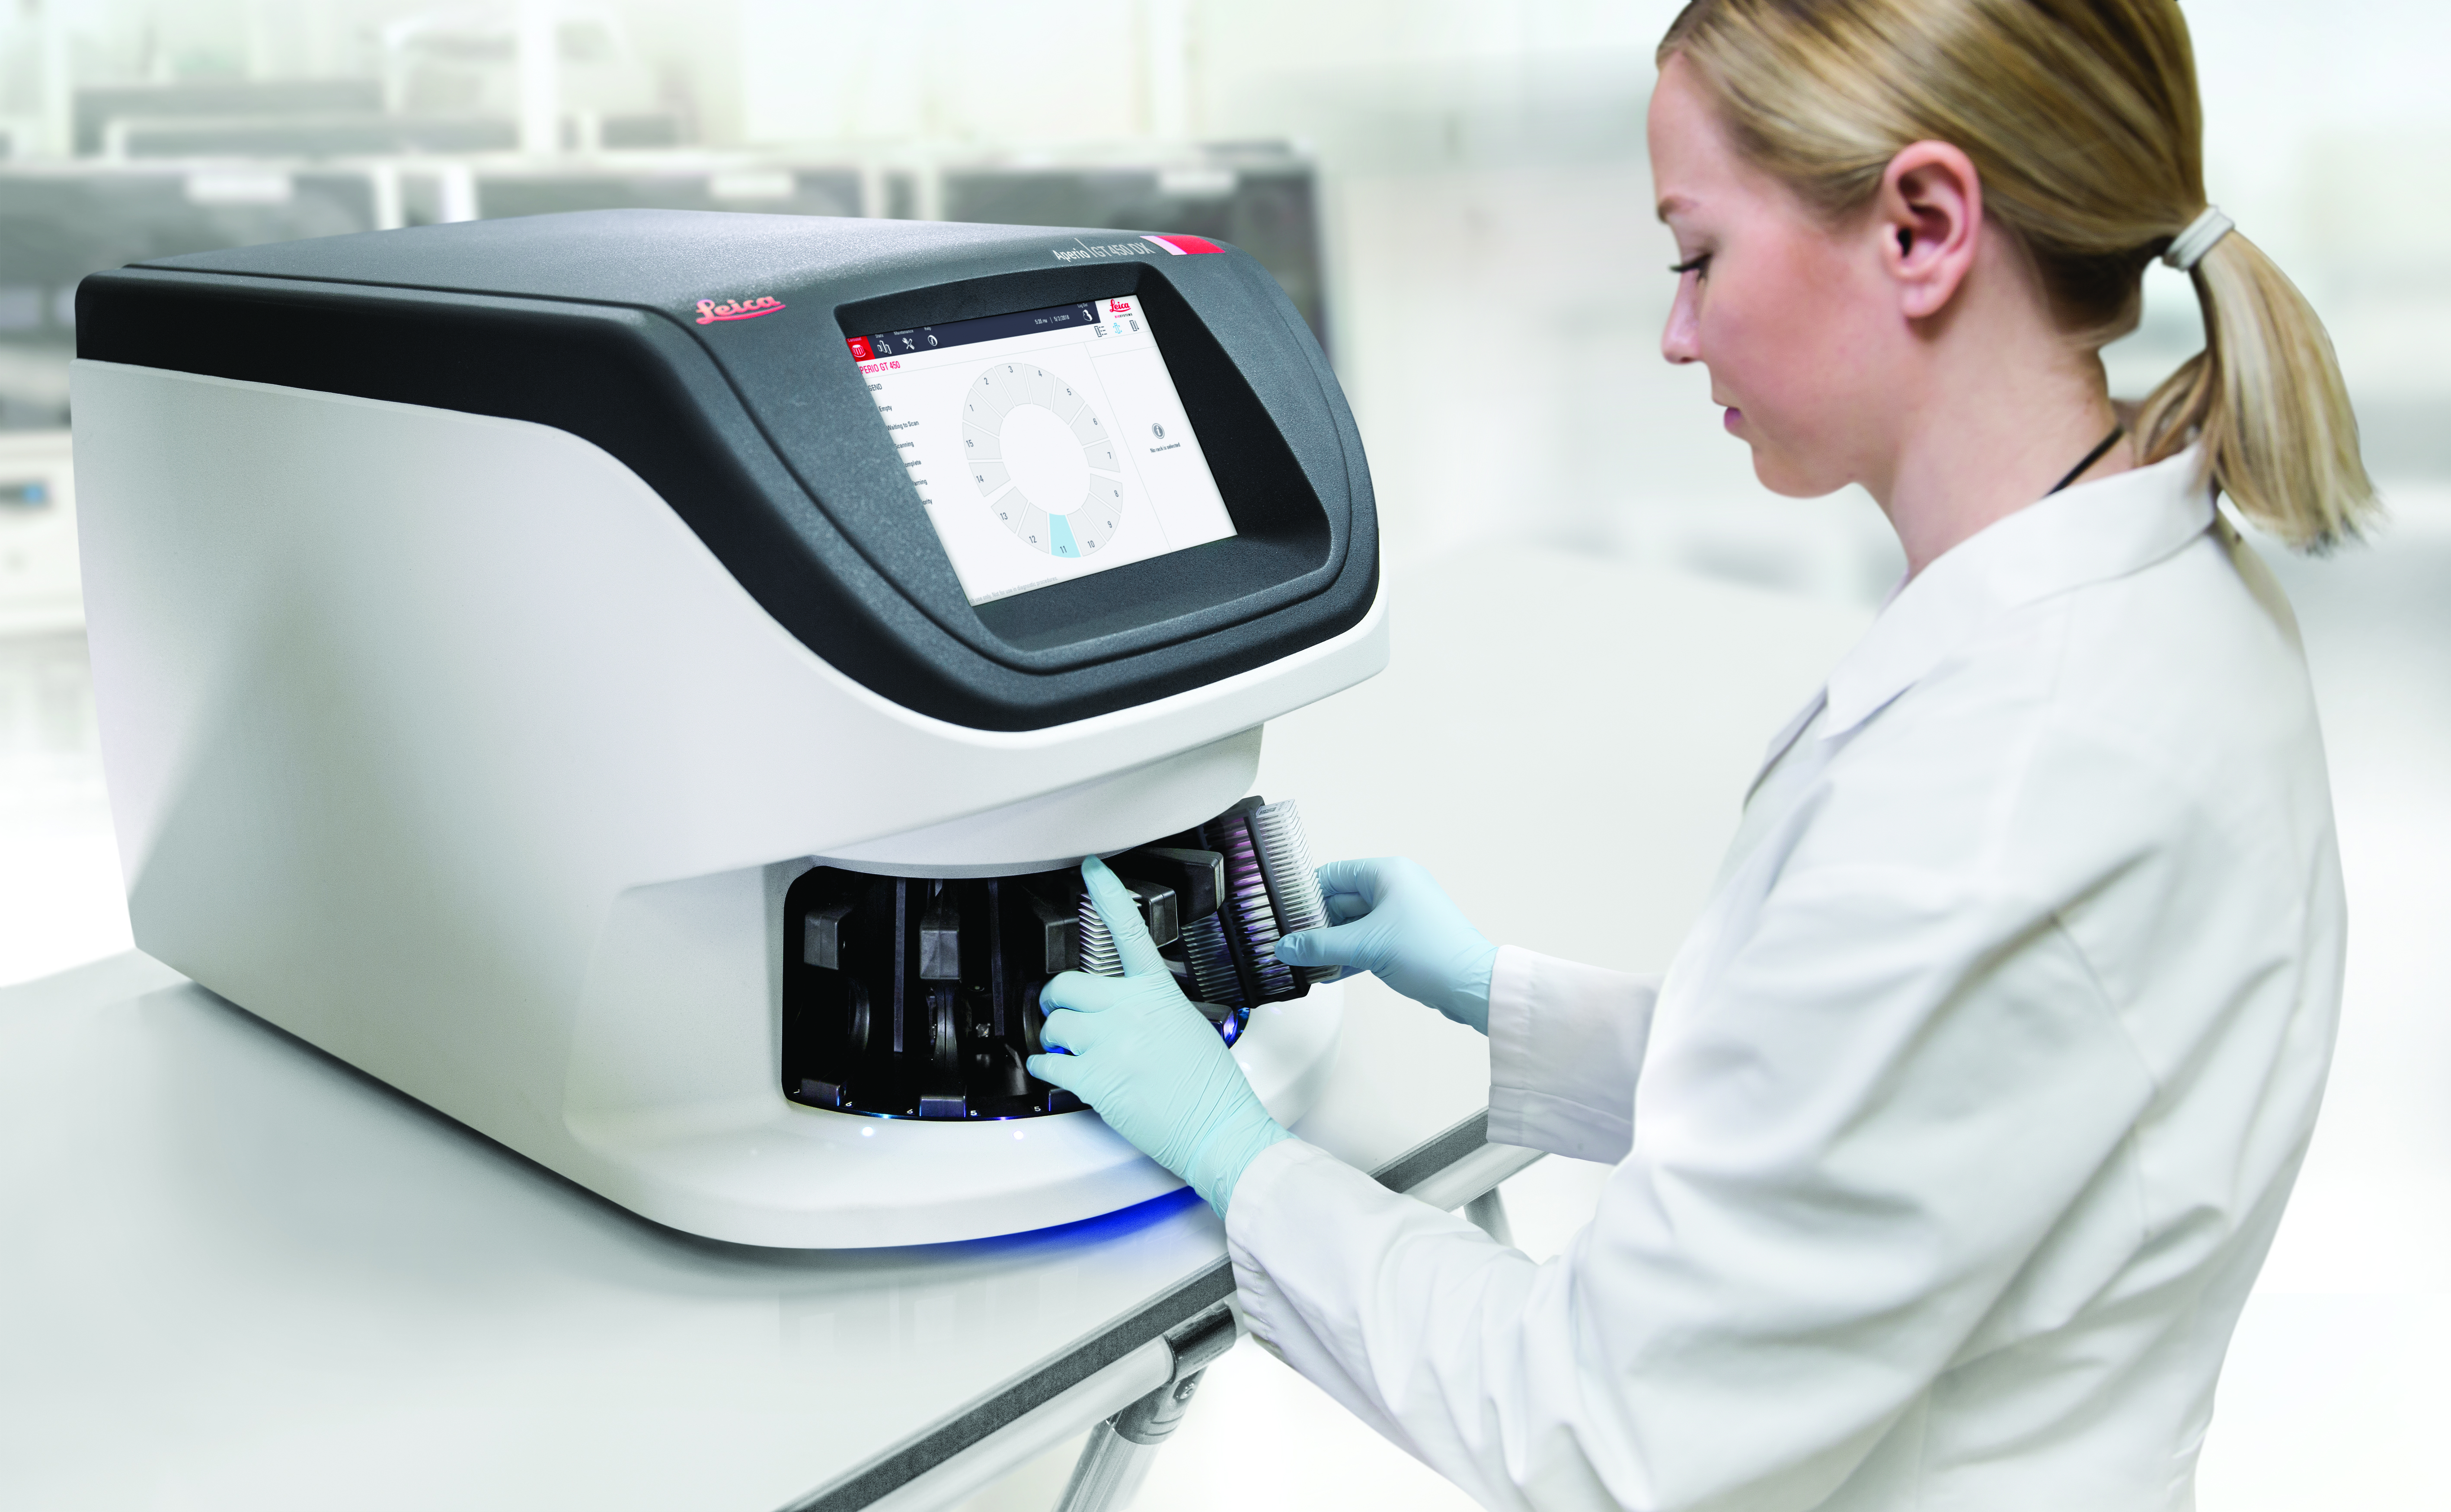 Aperio Pre-Owned Digital Pathology Scanners